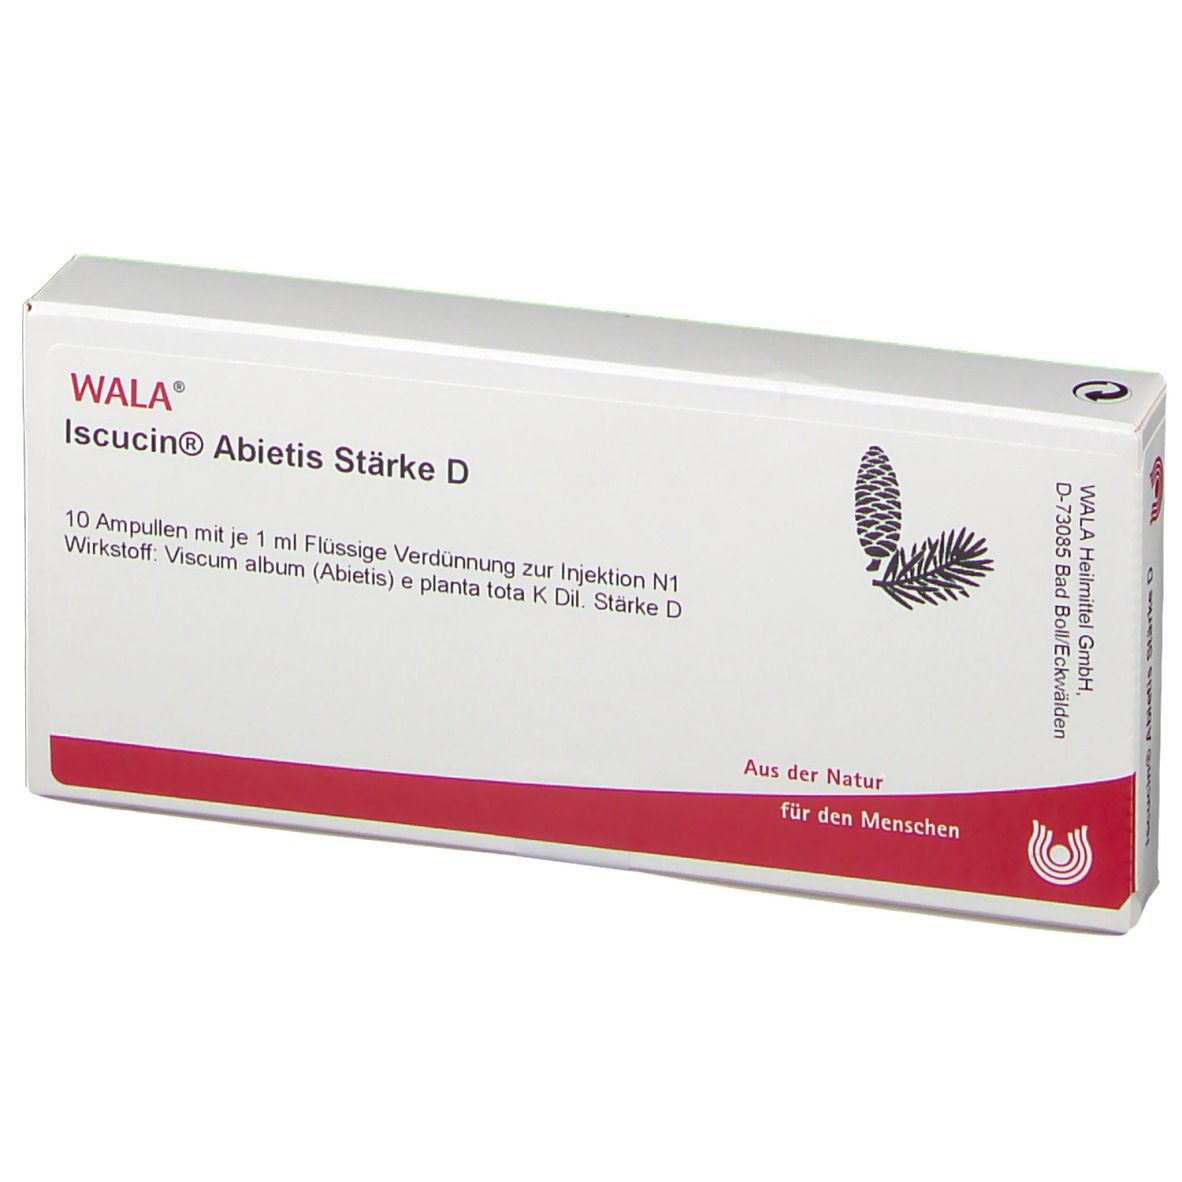 WALA® Iscucin Abietis St.D Amp.